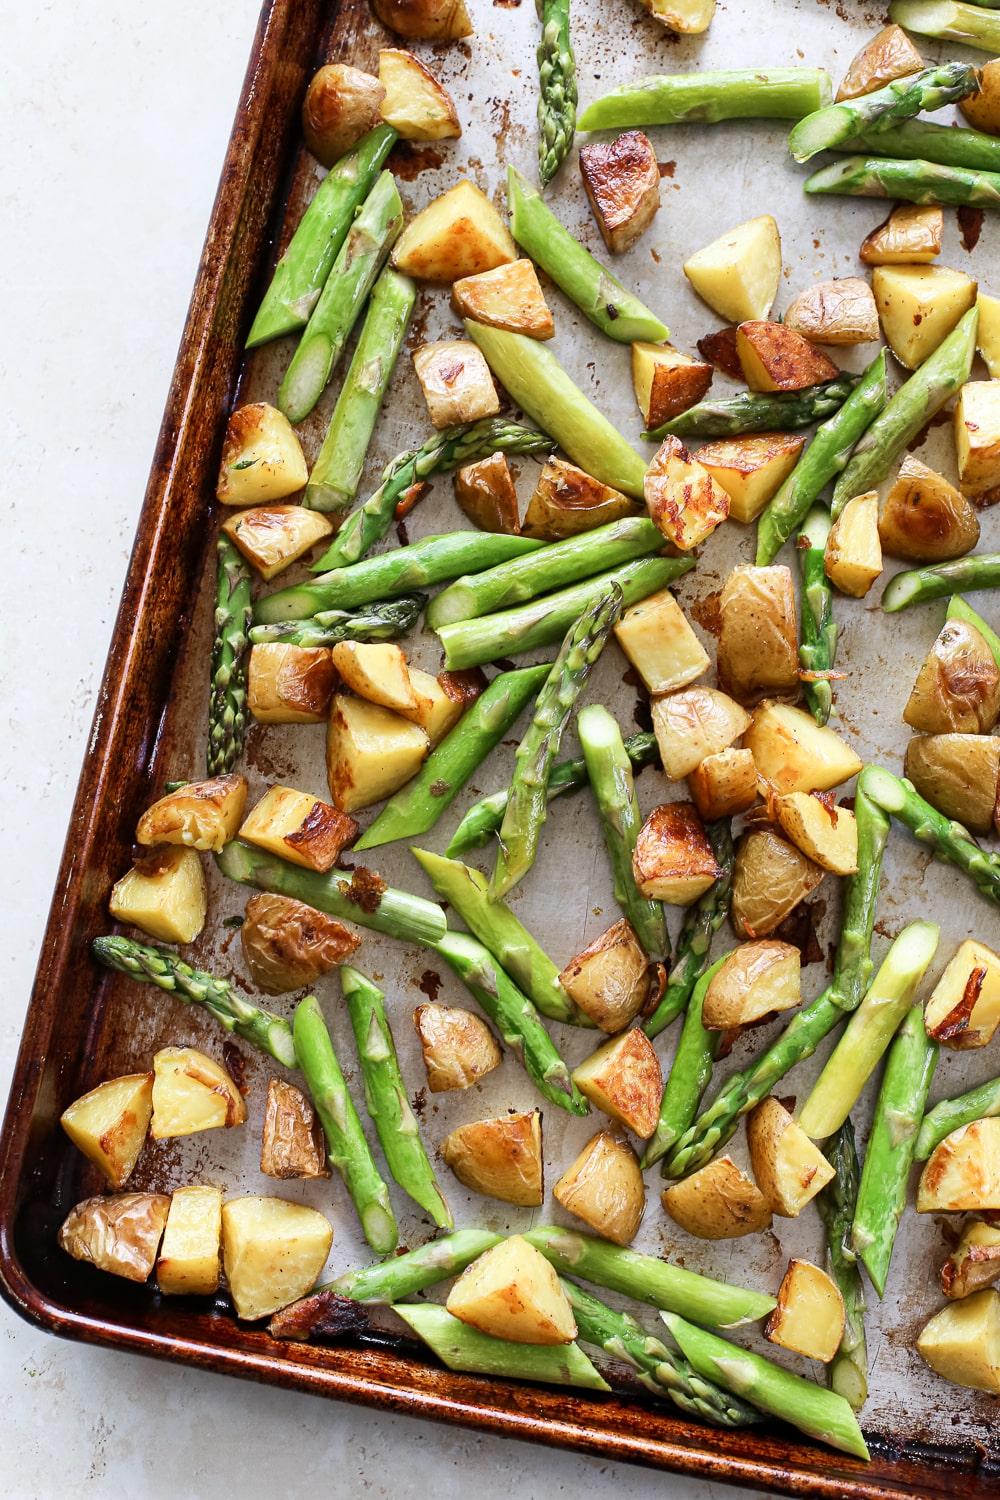 Roasted asparagus and potatoes on a baking sheet.